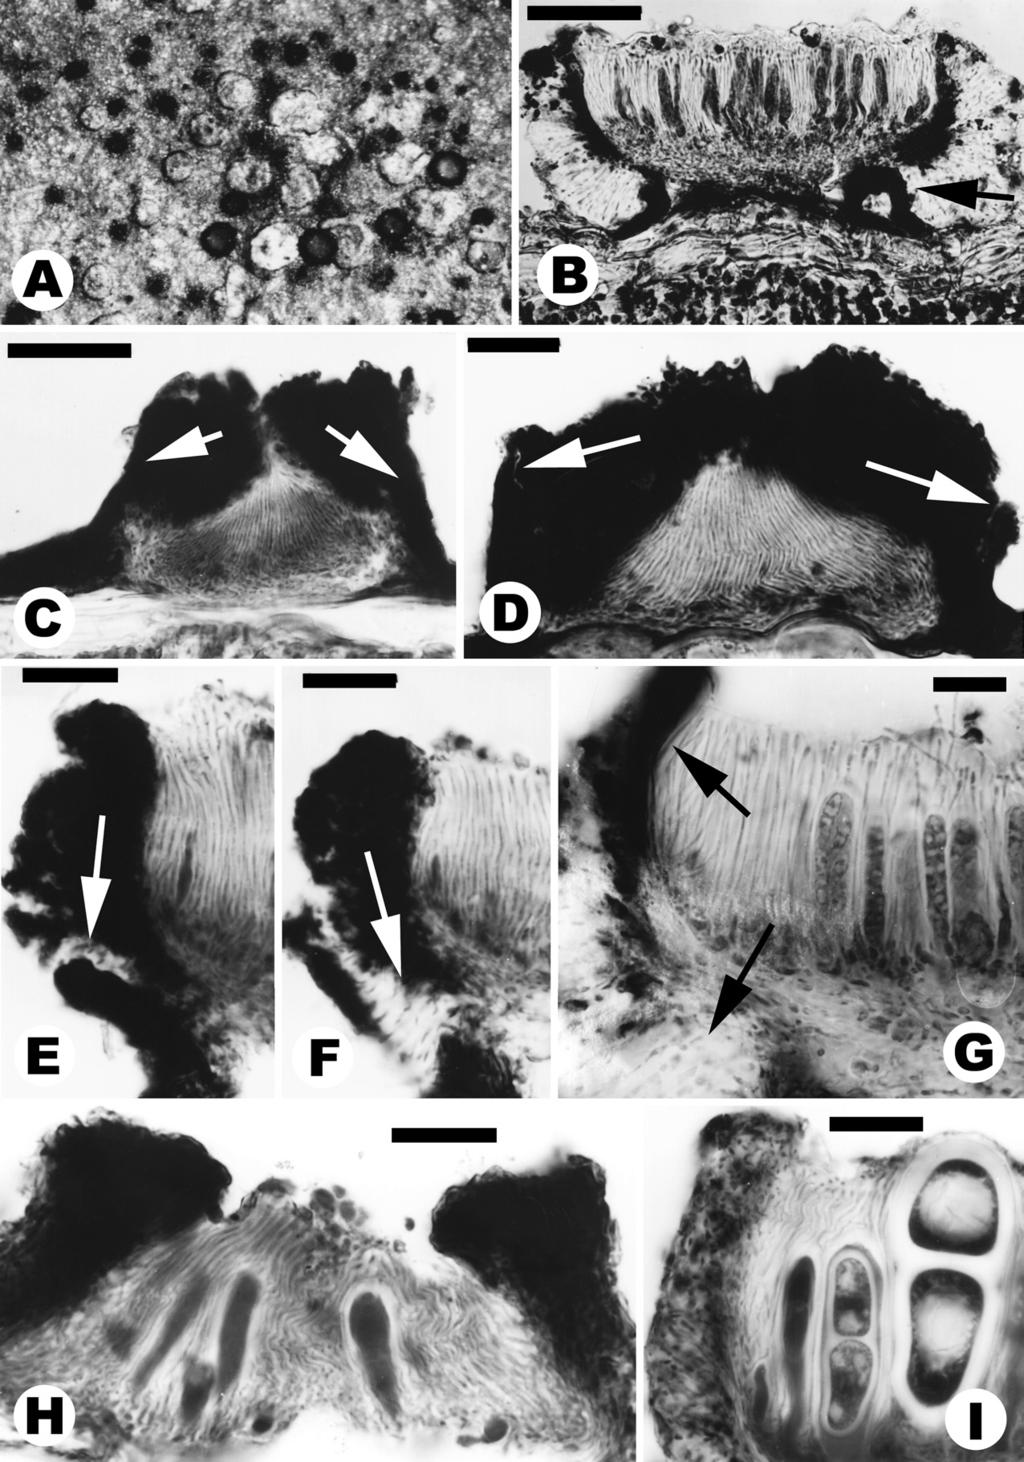 ANN. BOT. FENNICI Vol. 39 Ontogeny of Asterothyriaceae 285 Fig. 8. Apothecial anatomy and ontogeny in Psorotheciopsis (B I microtome sections in LB). A G: P. patellarioides (Guinea, Lisowski s.n.; Vezda: Lich.